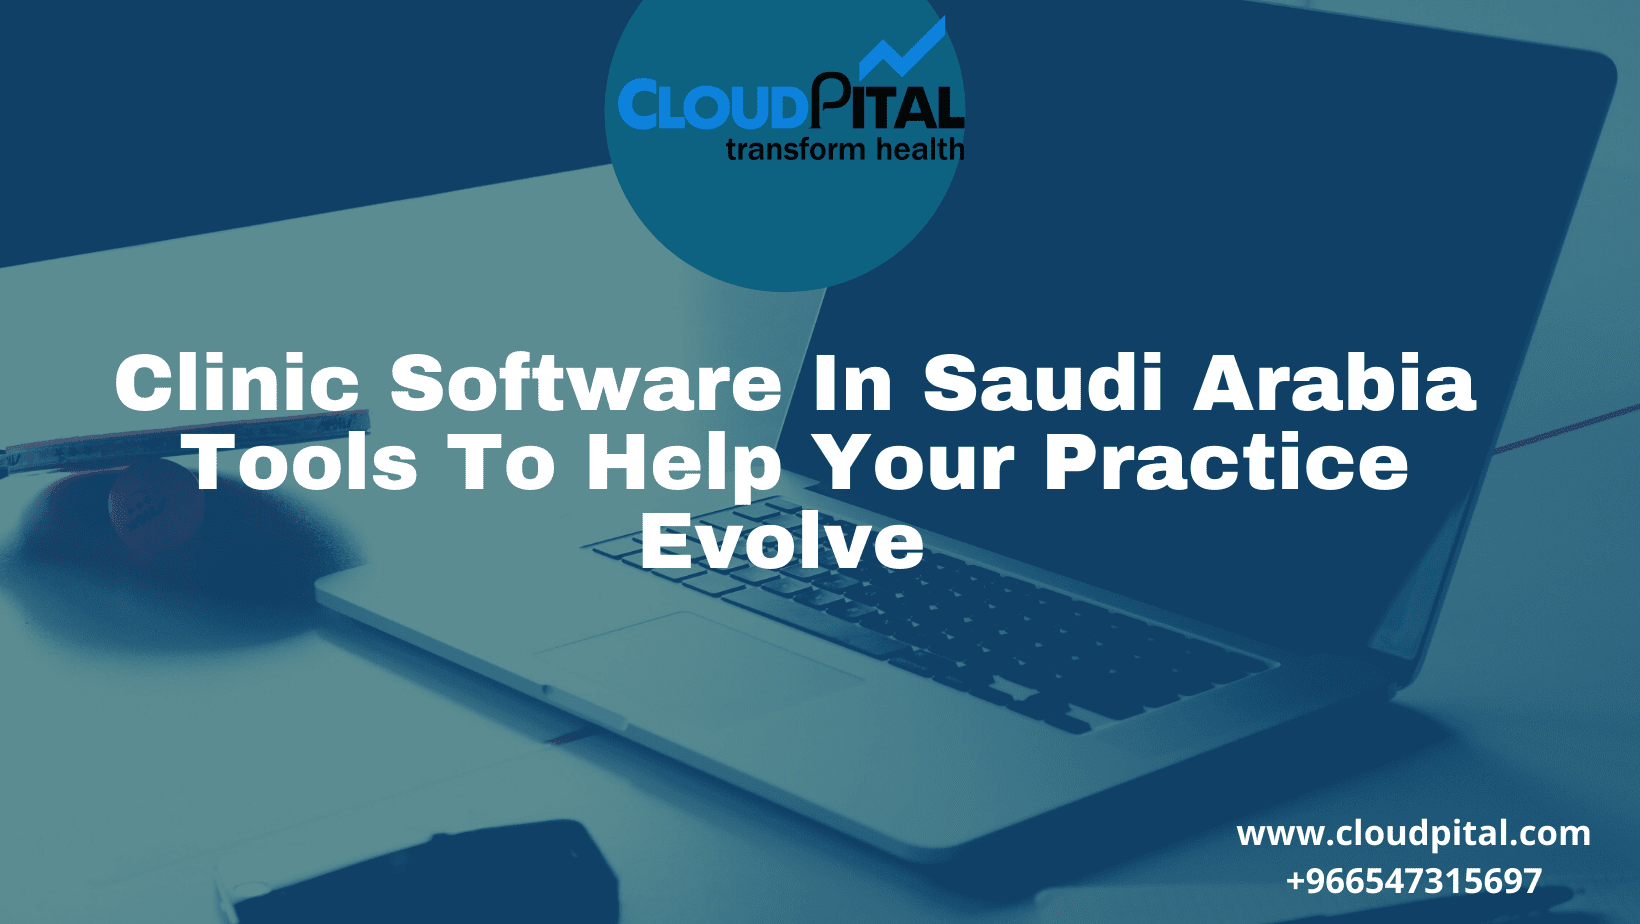 Clinic Software In Saudi Arabia Tools To Help Your Practice Evolve During The Crisis Of COVID-19 